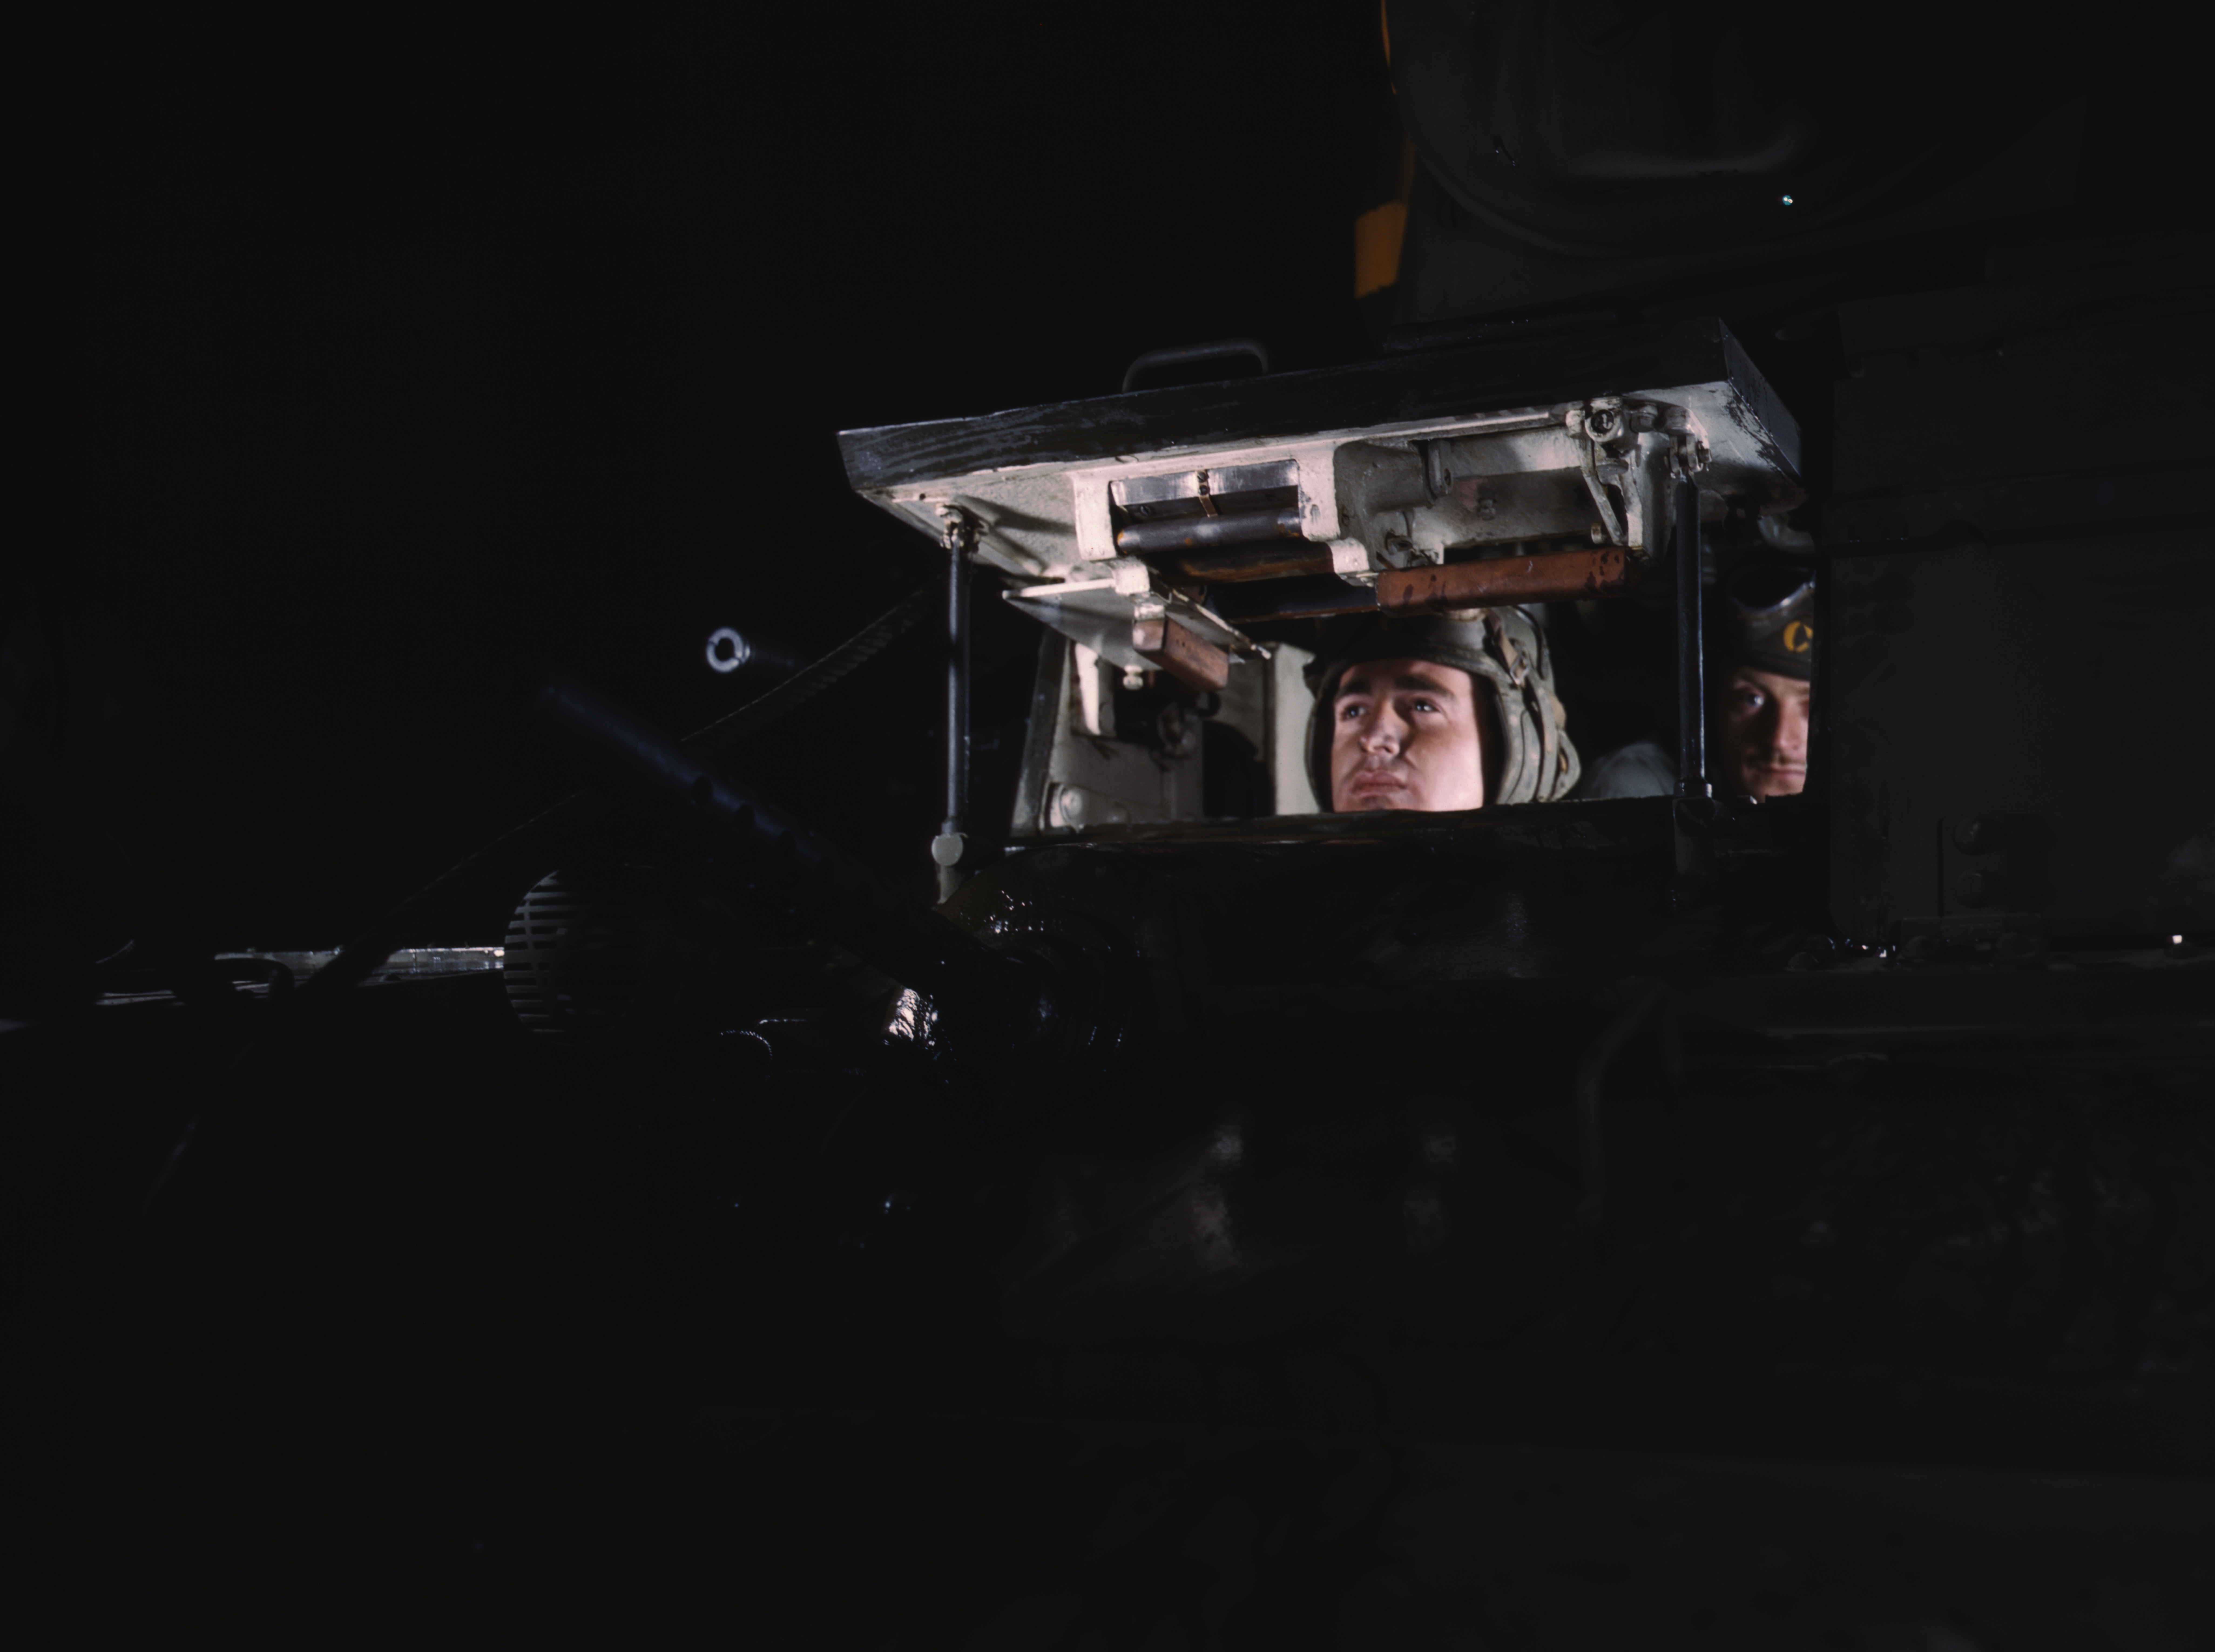 Crew of an American M2 light tank peering out of the forward hatch, Fort Knox, Kentucky, United States, Jun 1942